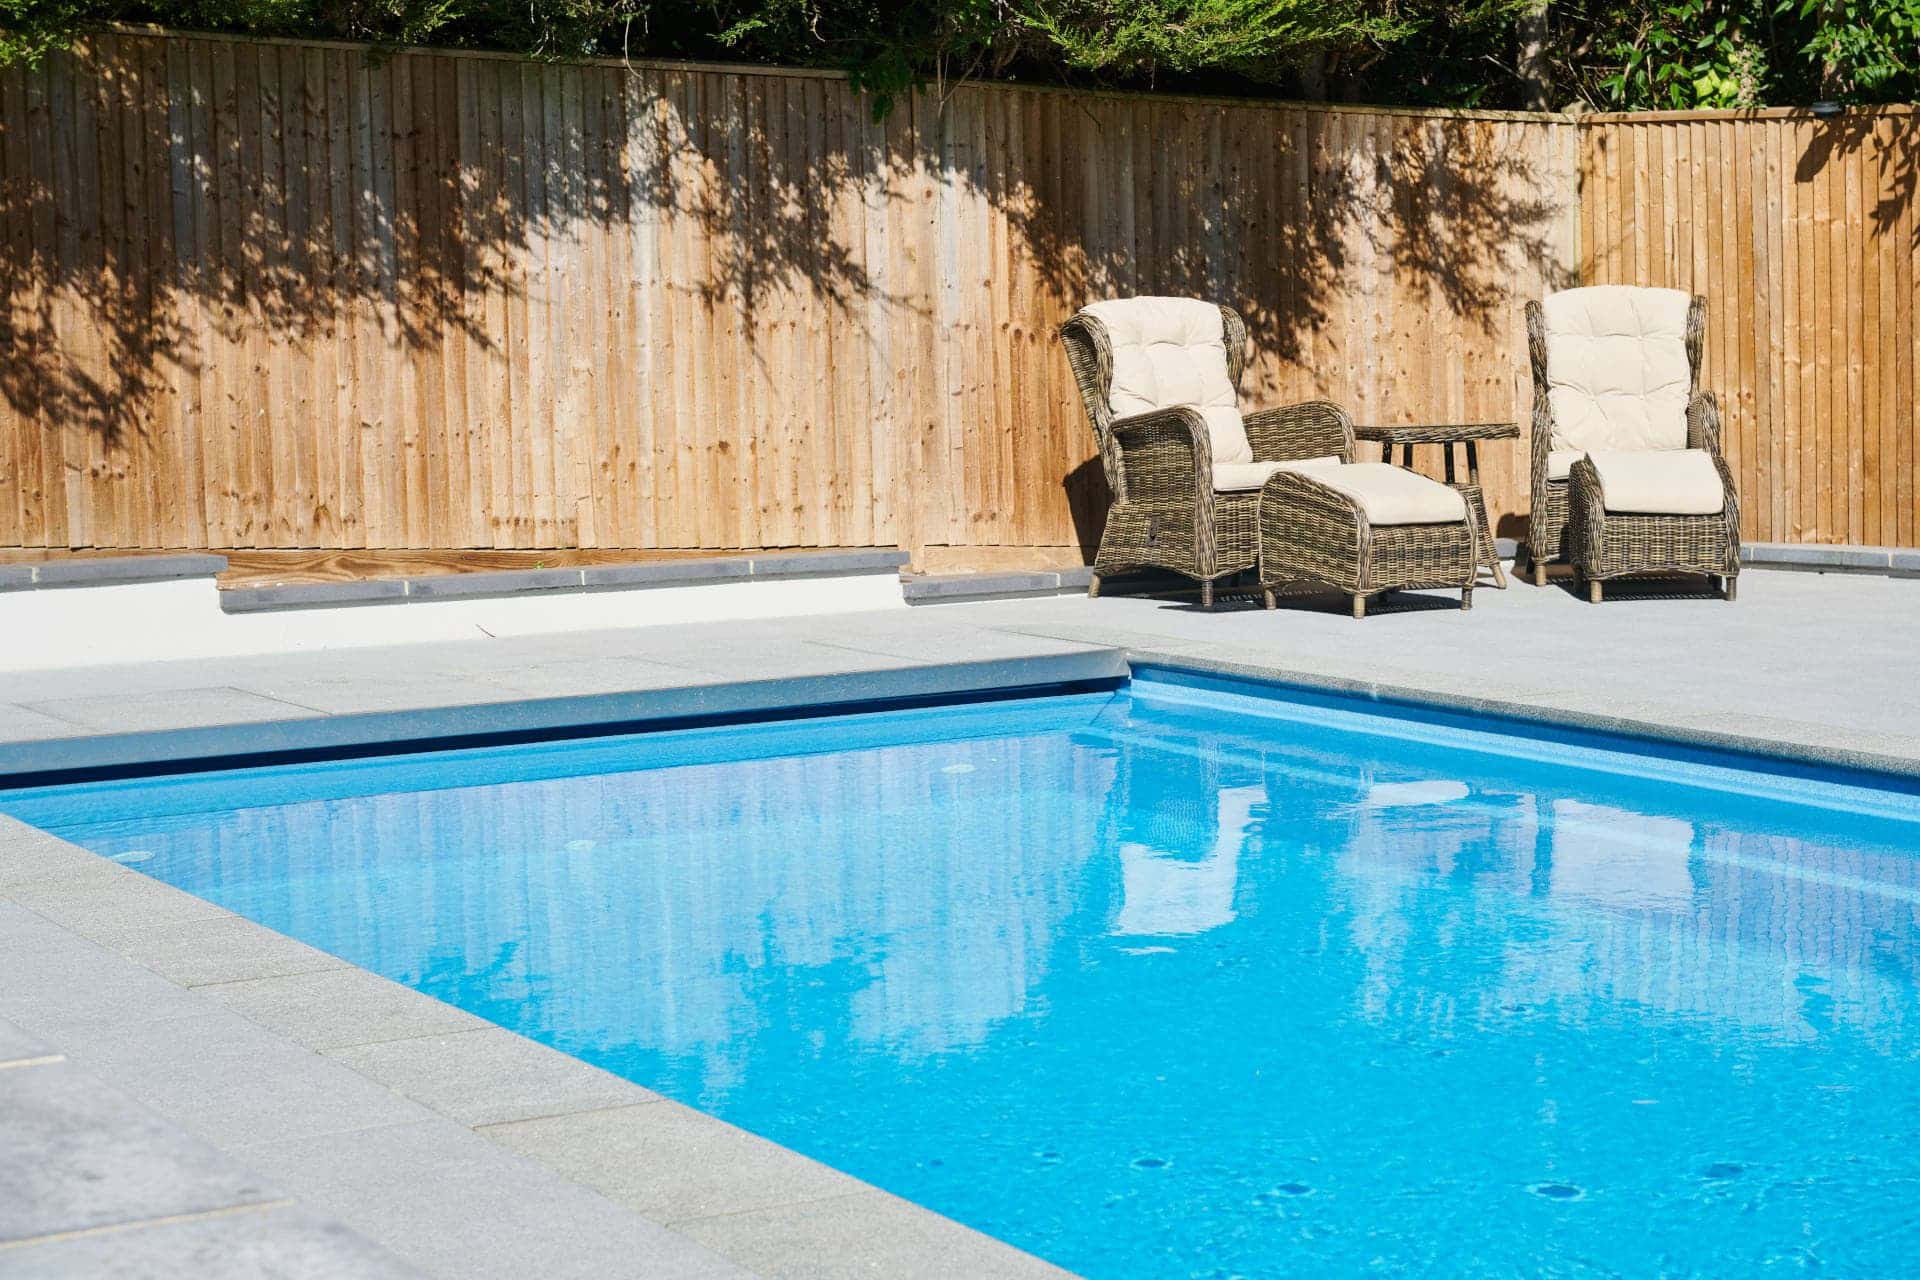 Why Put Your Trust in a Professional Pool Builder?